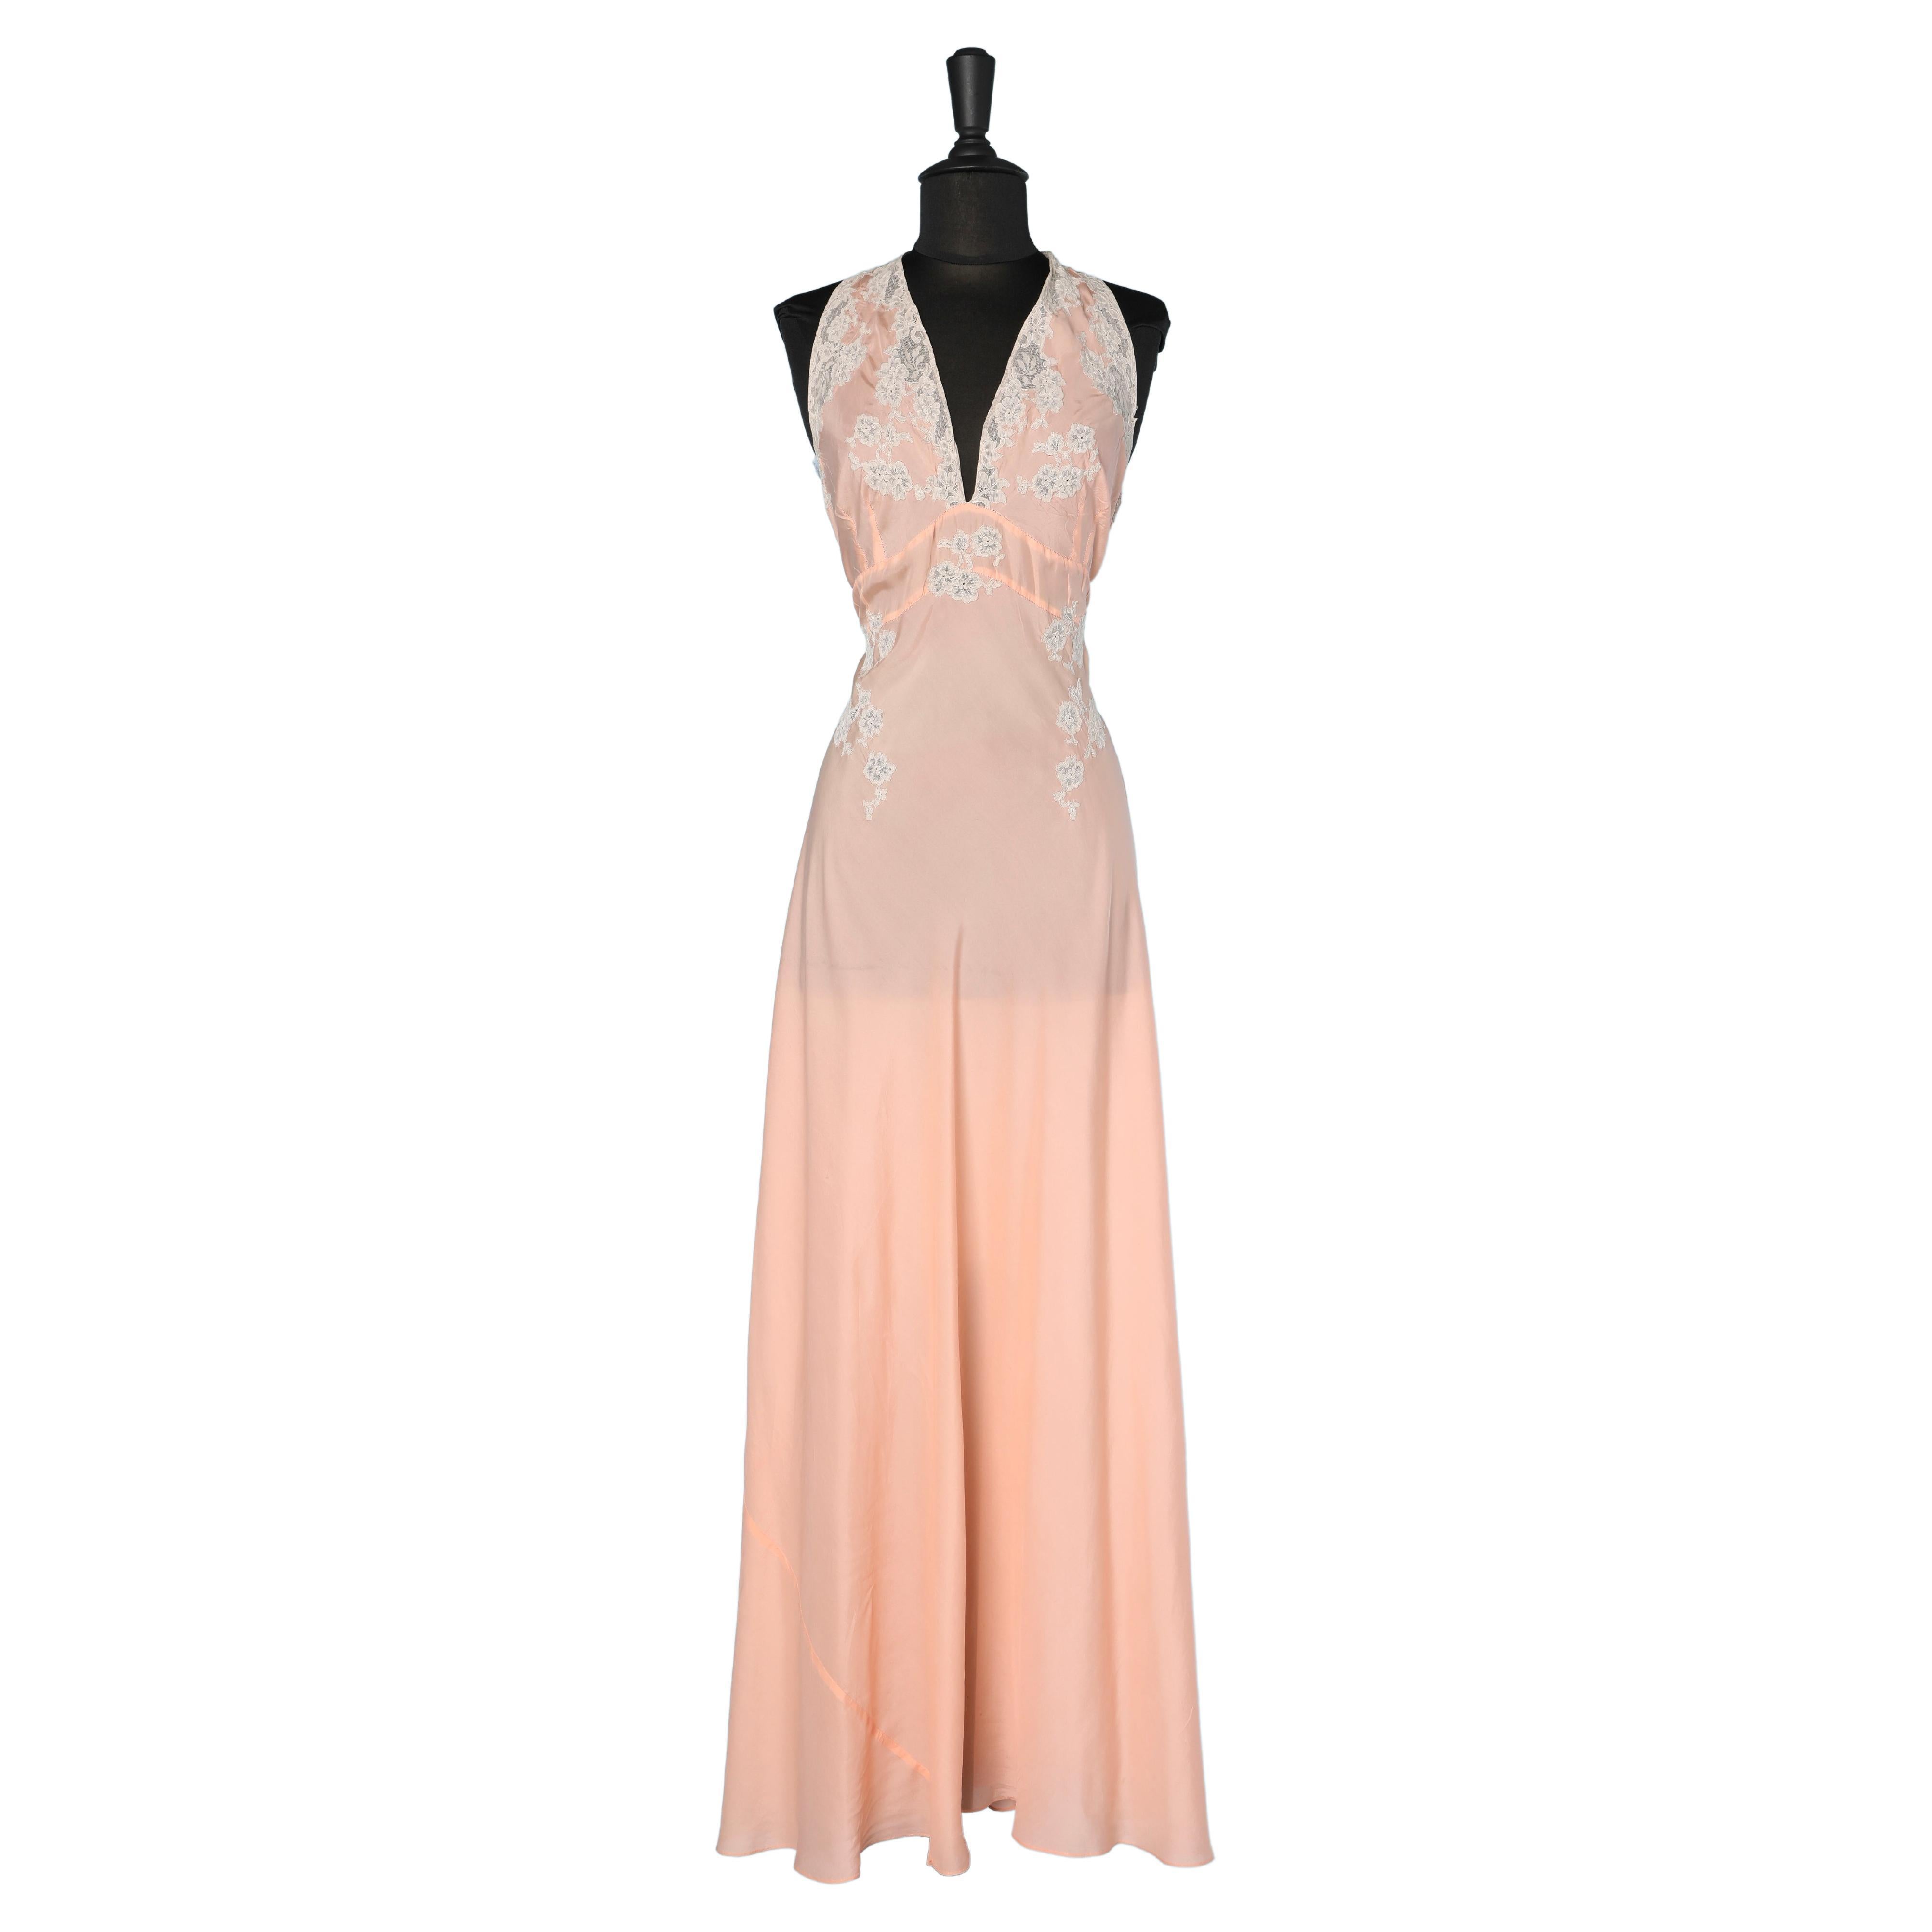 Pale pink silk and lace sleeping gown Circa 1930